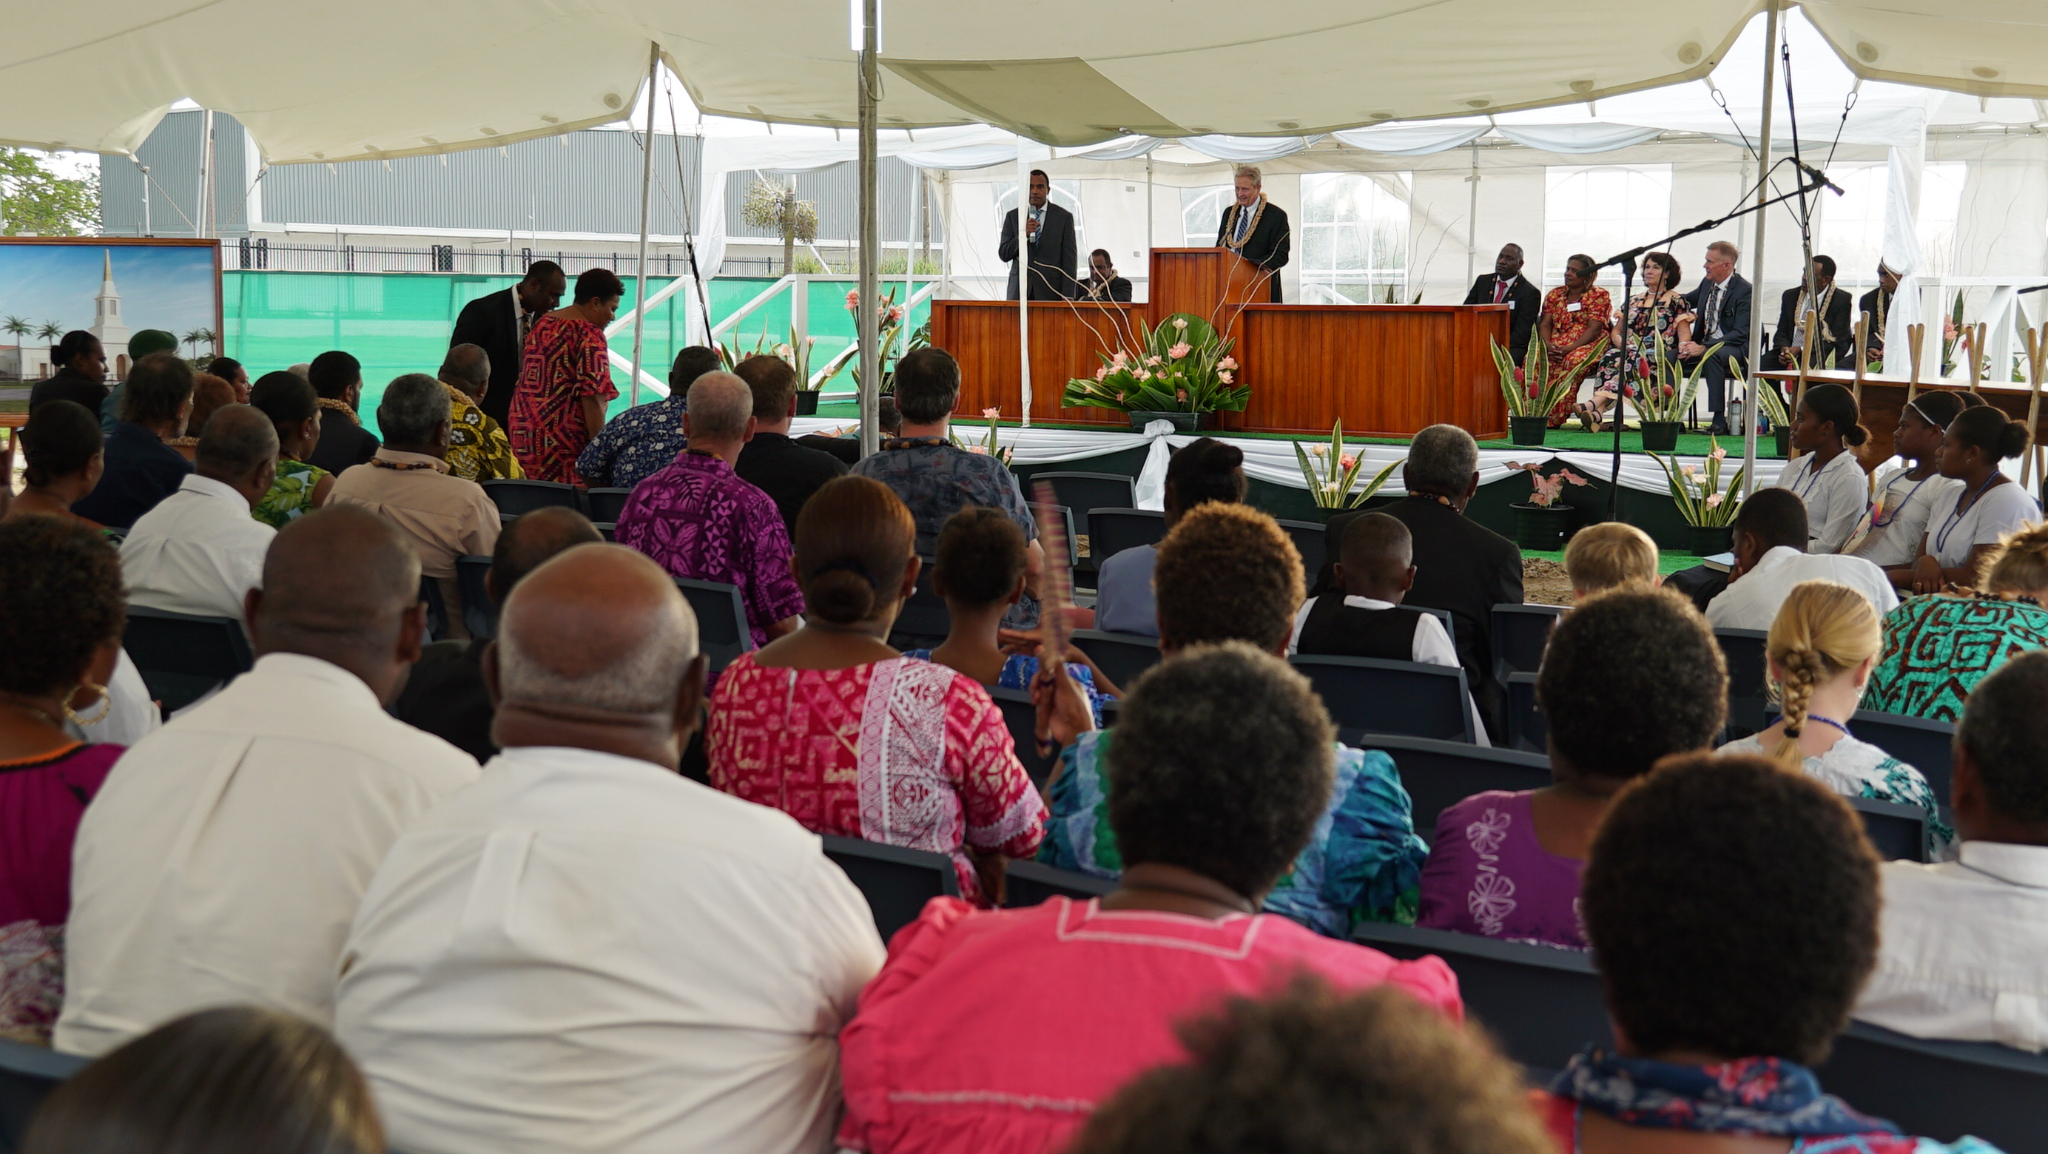 A large congregation of people under a cloth shade structure outside, listening to a man in a suit speak at a pulpit.